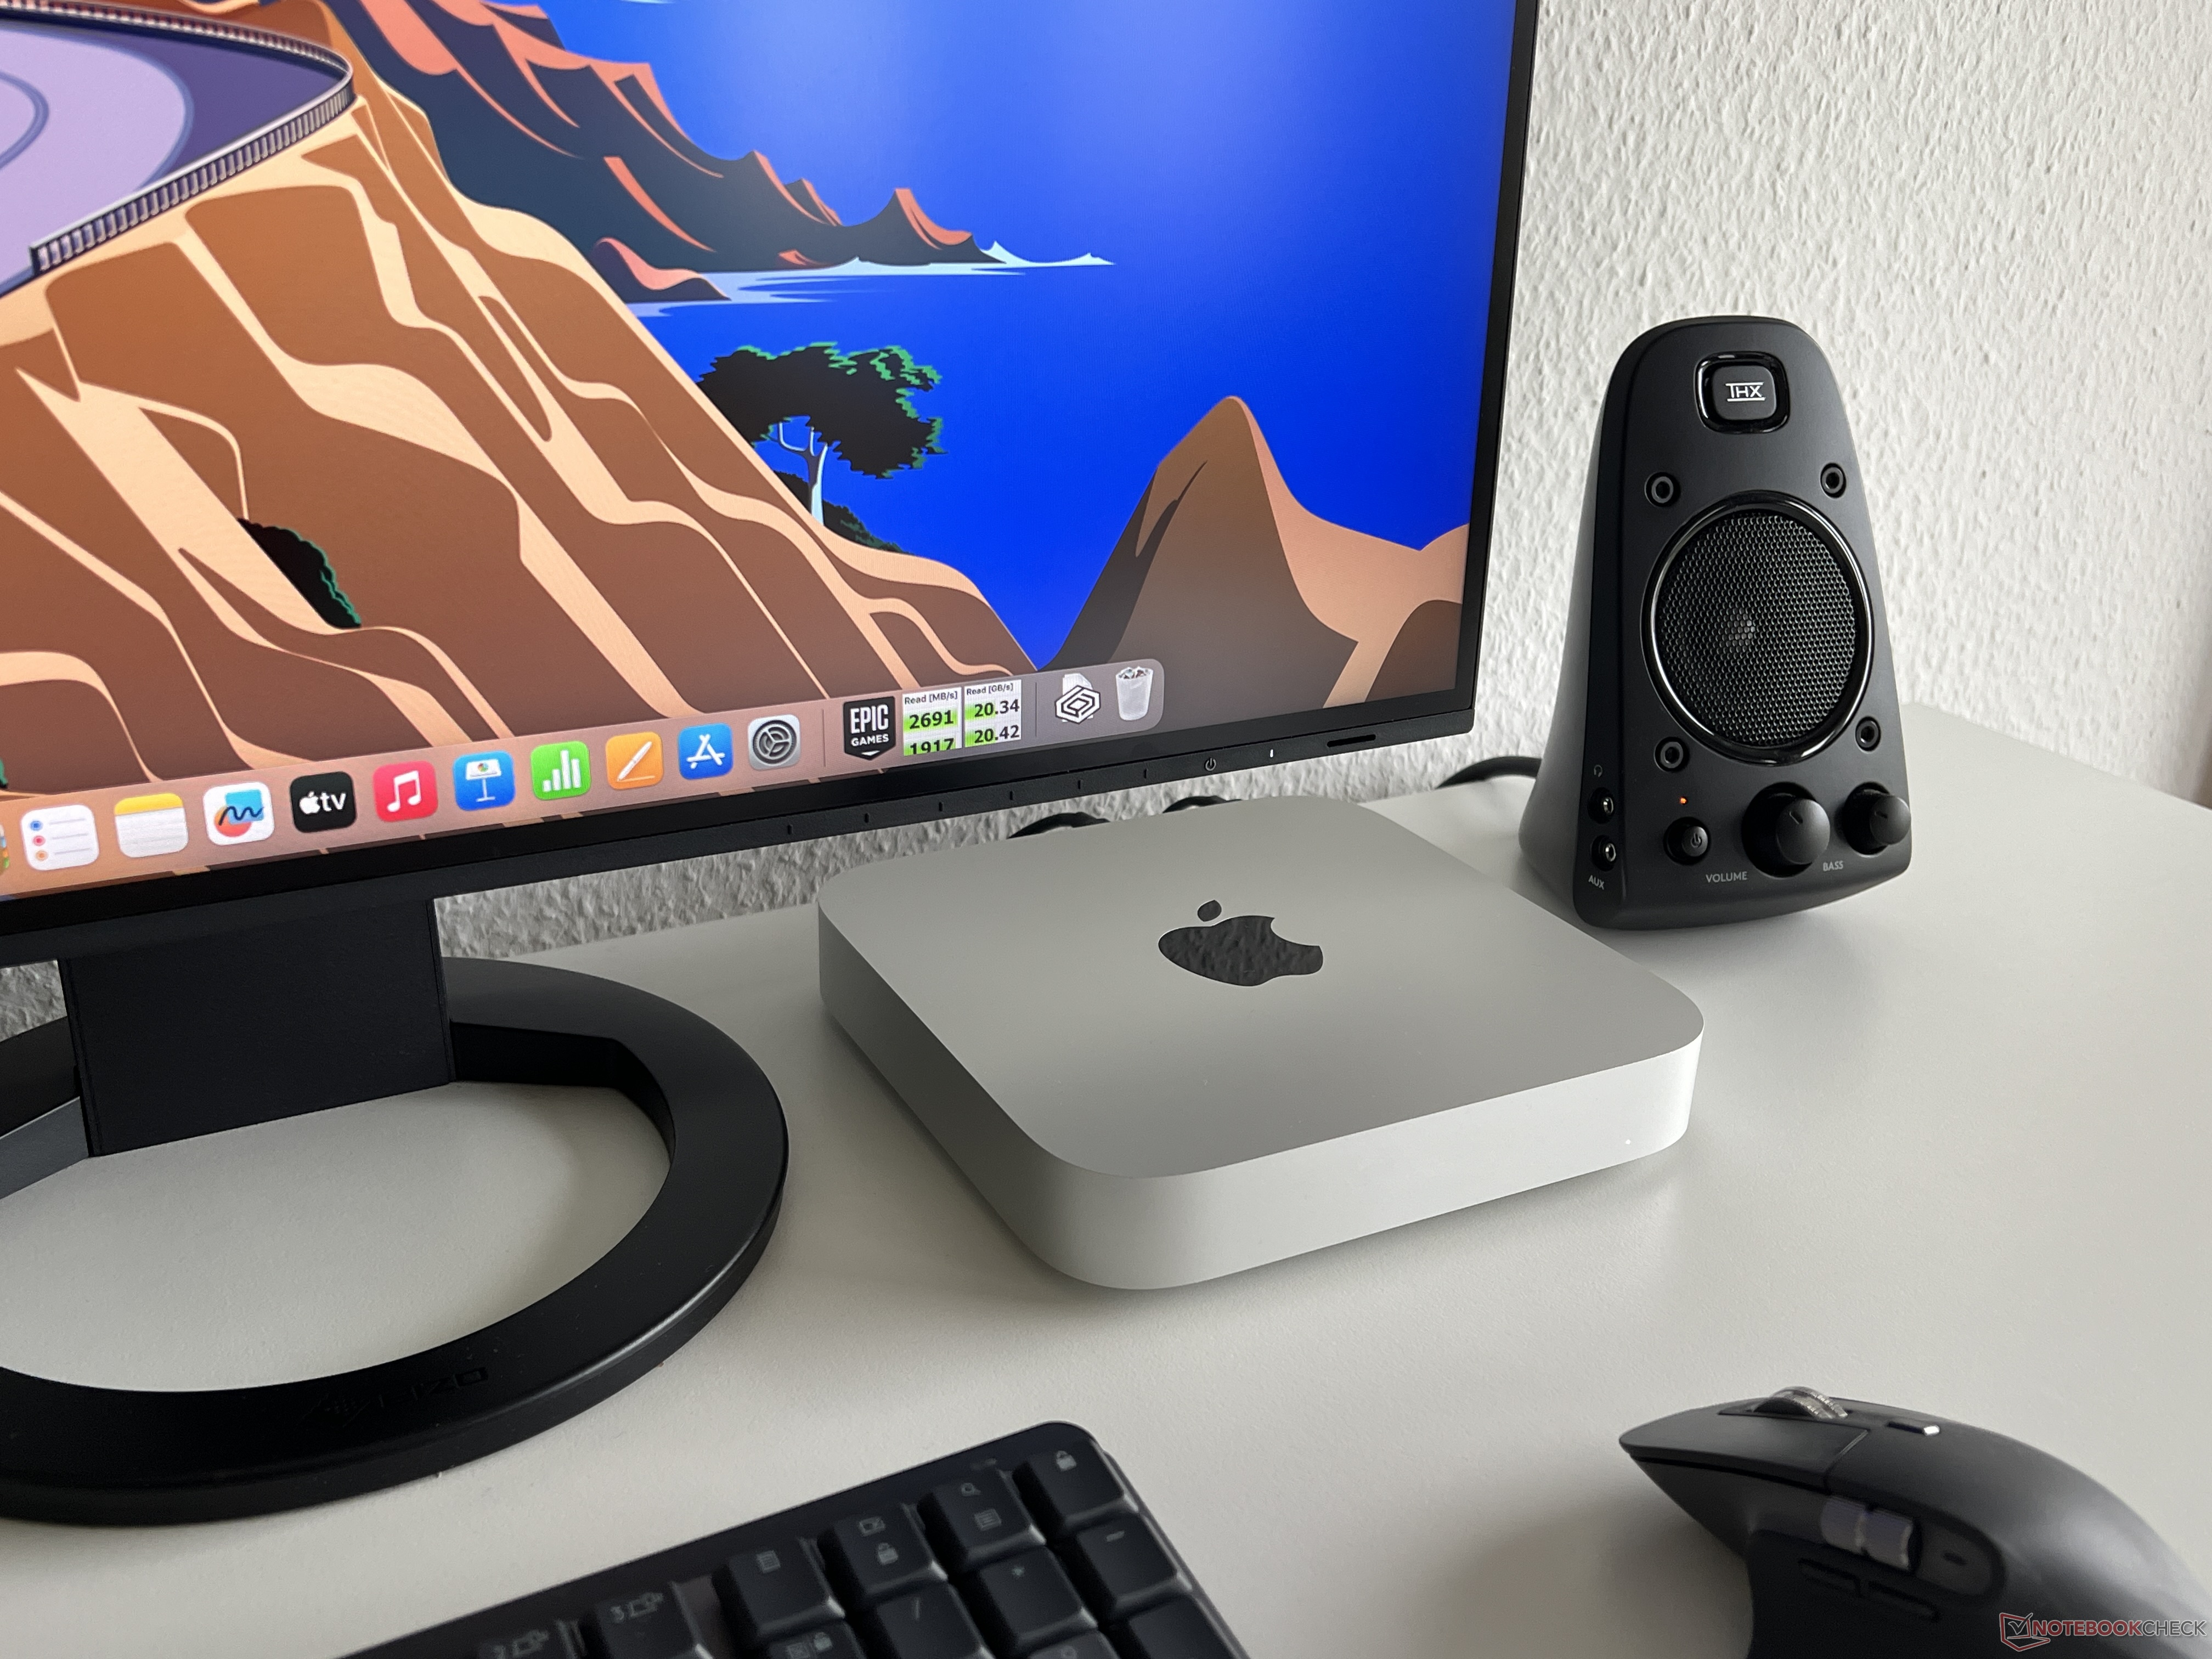 Mac mini with M1 Chip: Release date, price, specs and performance